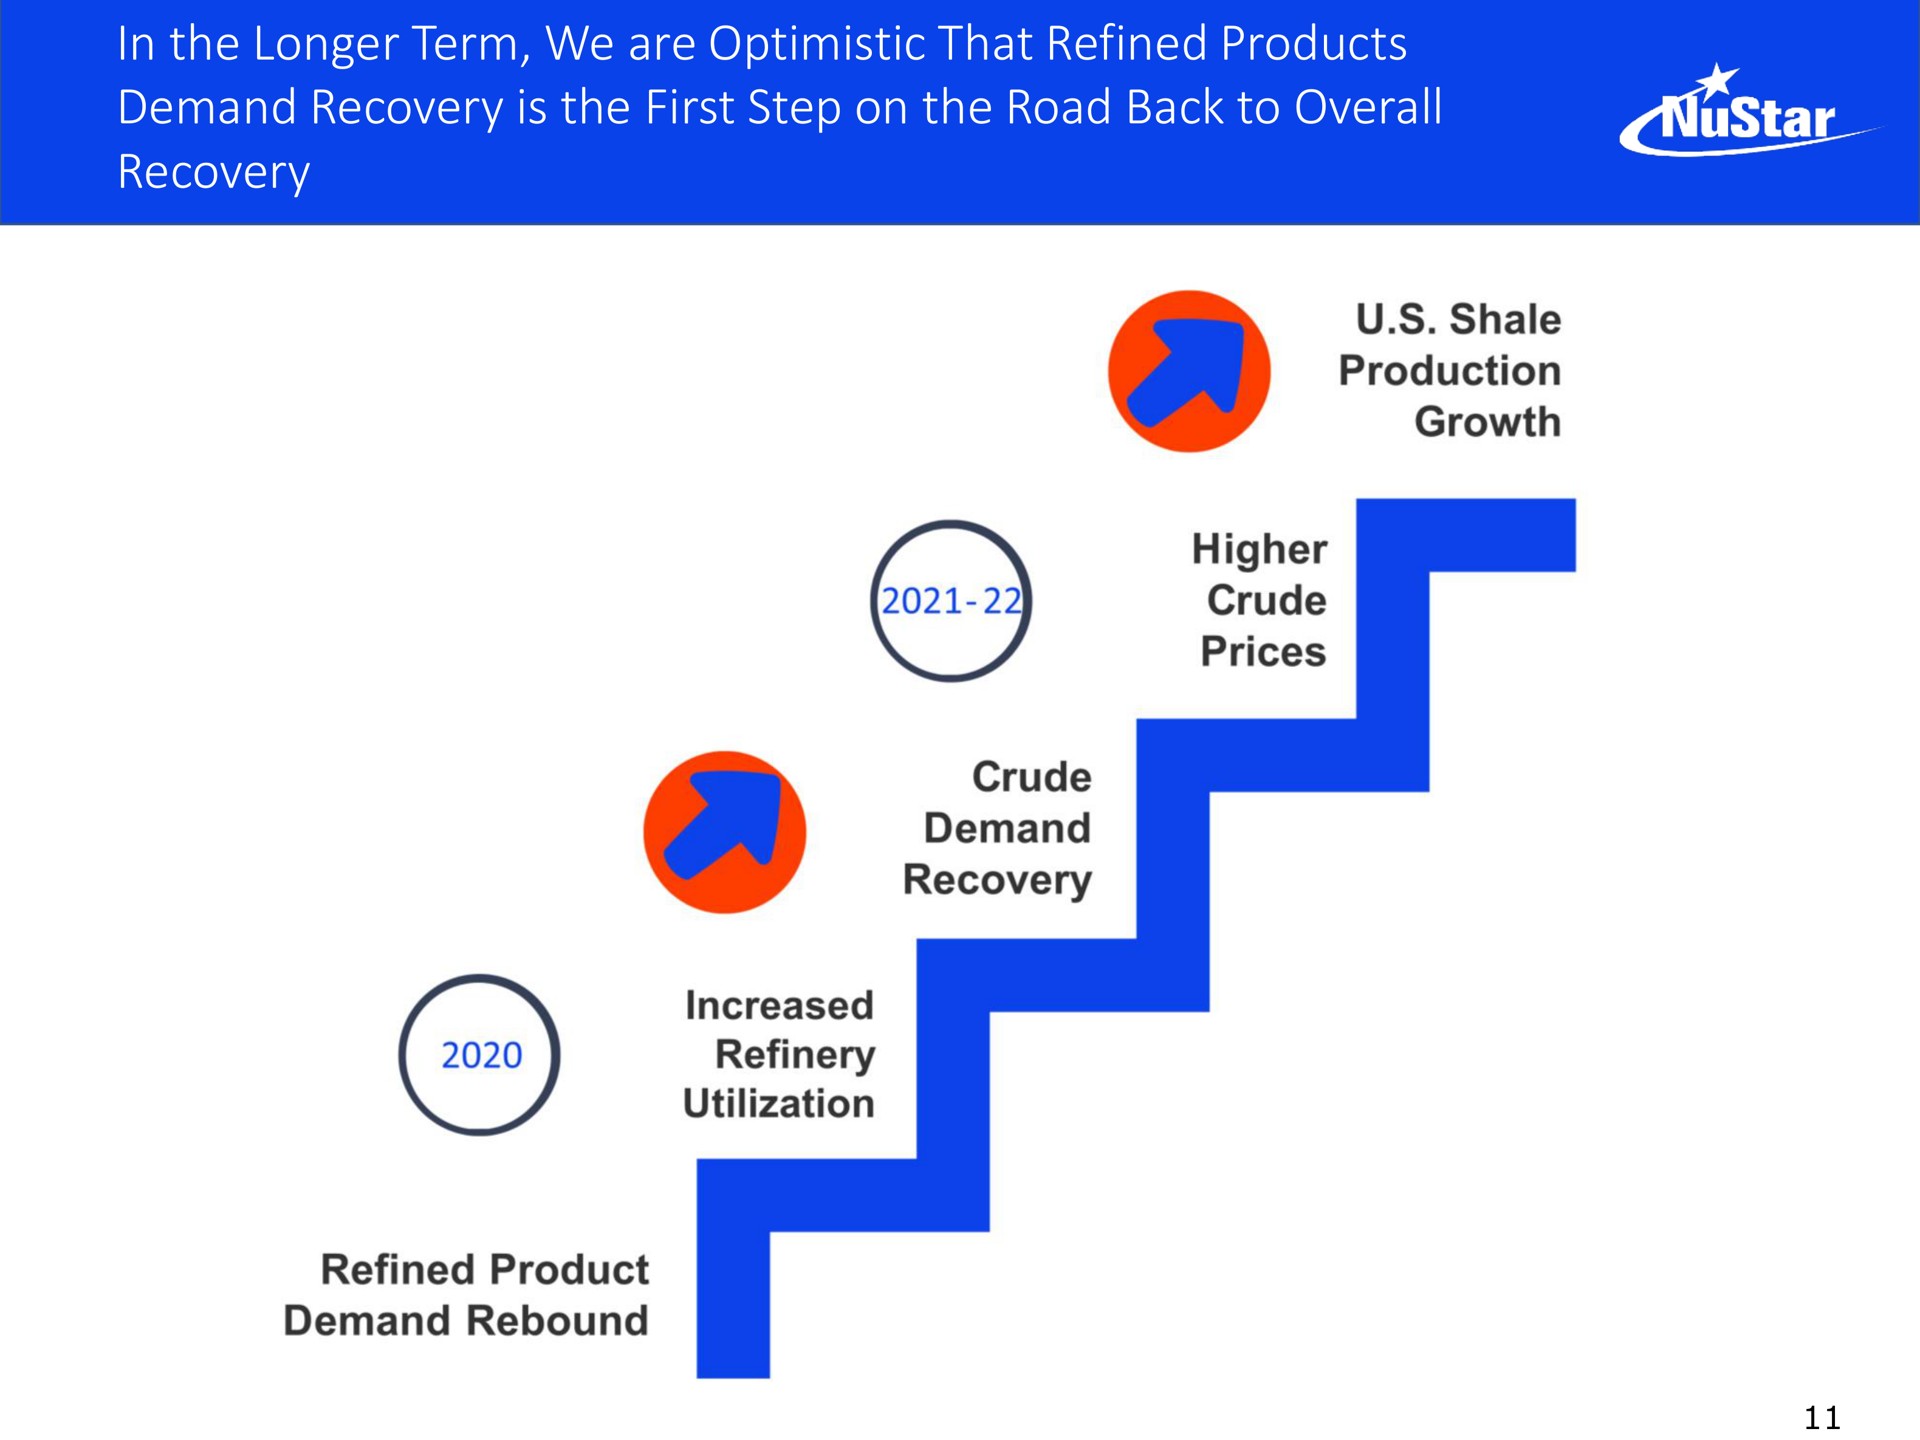 in the longer term we are optimistic that refined products demand recovery is the first step on the road back to overall recovery | NuStar Energy